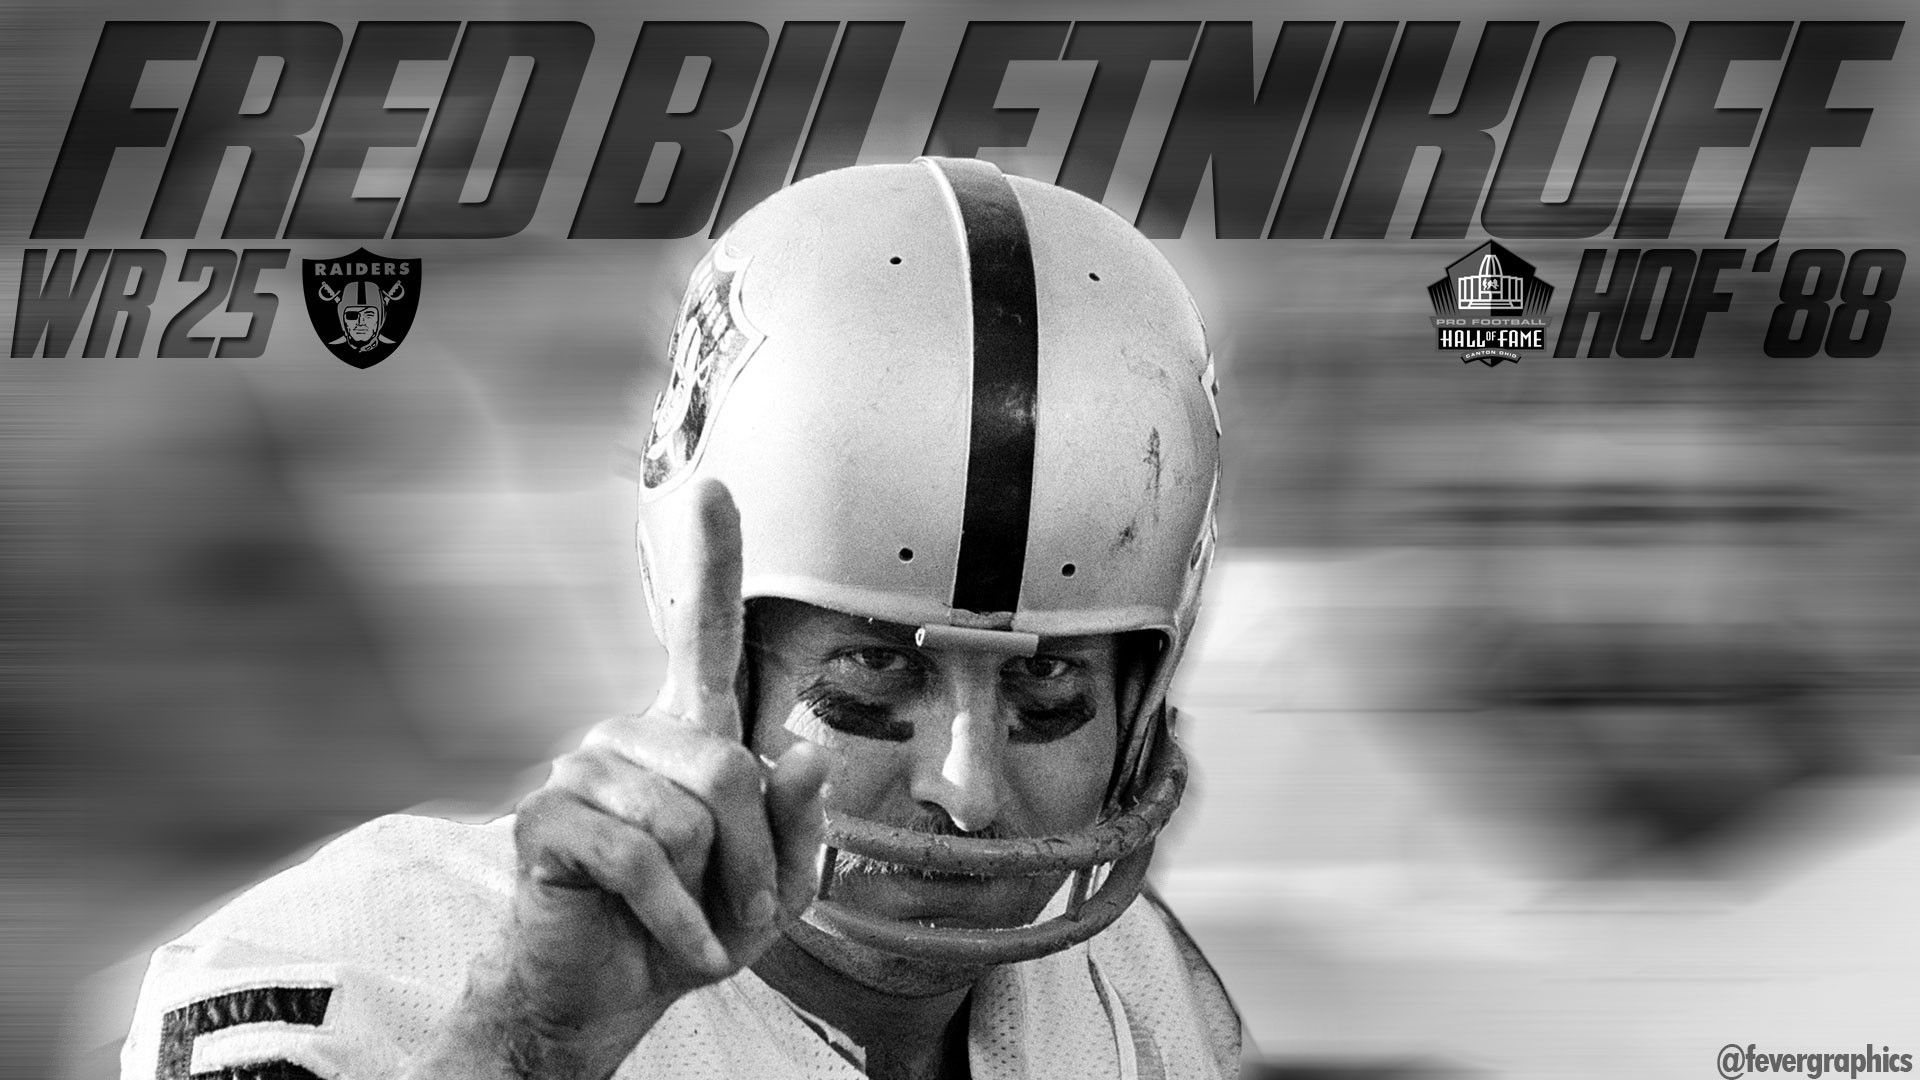 1920x1080 Made a Fred Biletnikoff wallpaper for Raider Nation! Hope you guys like it!